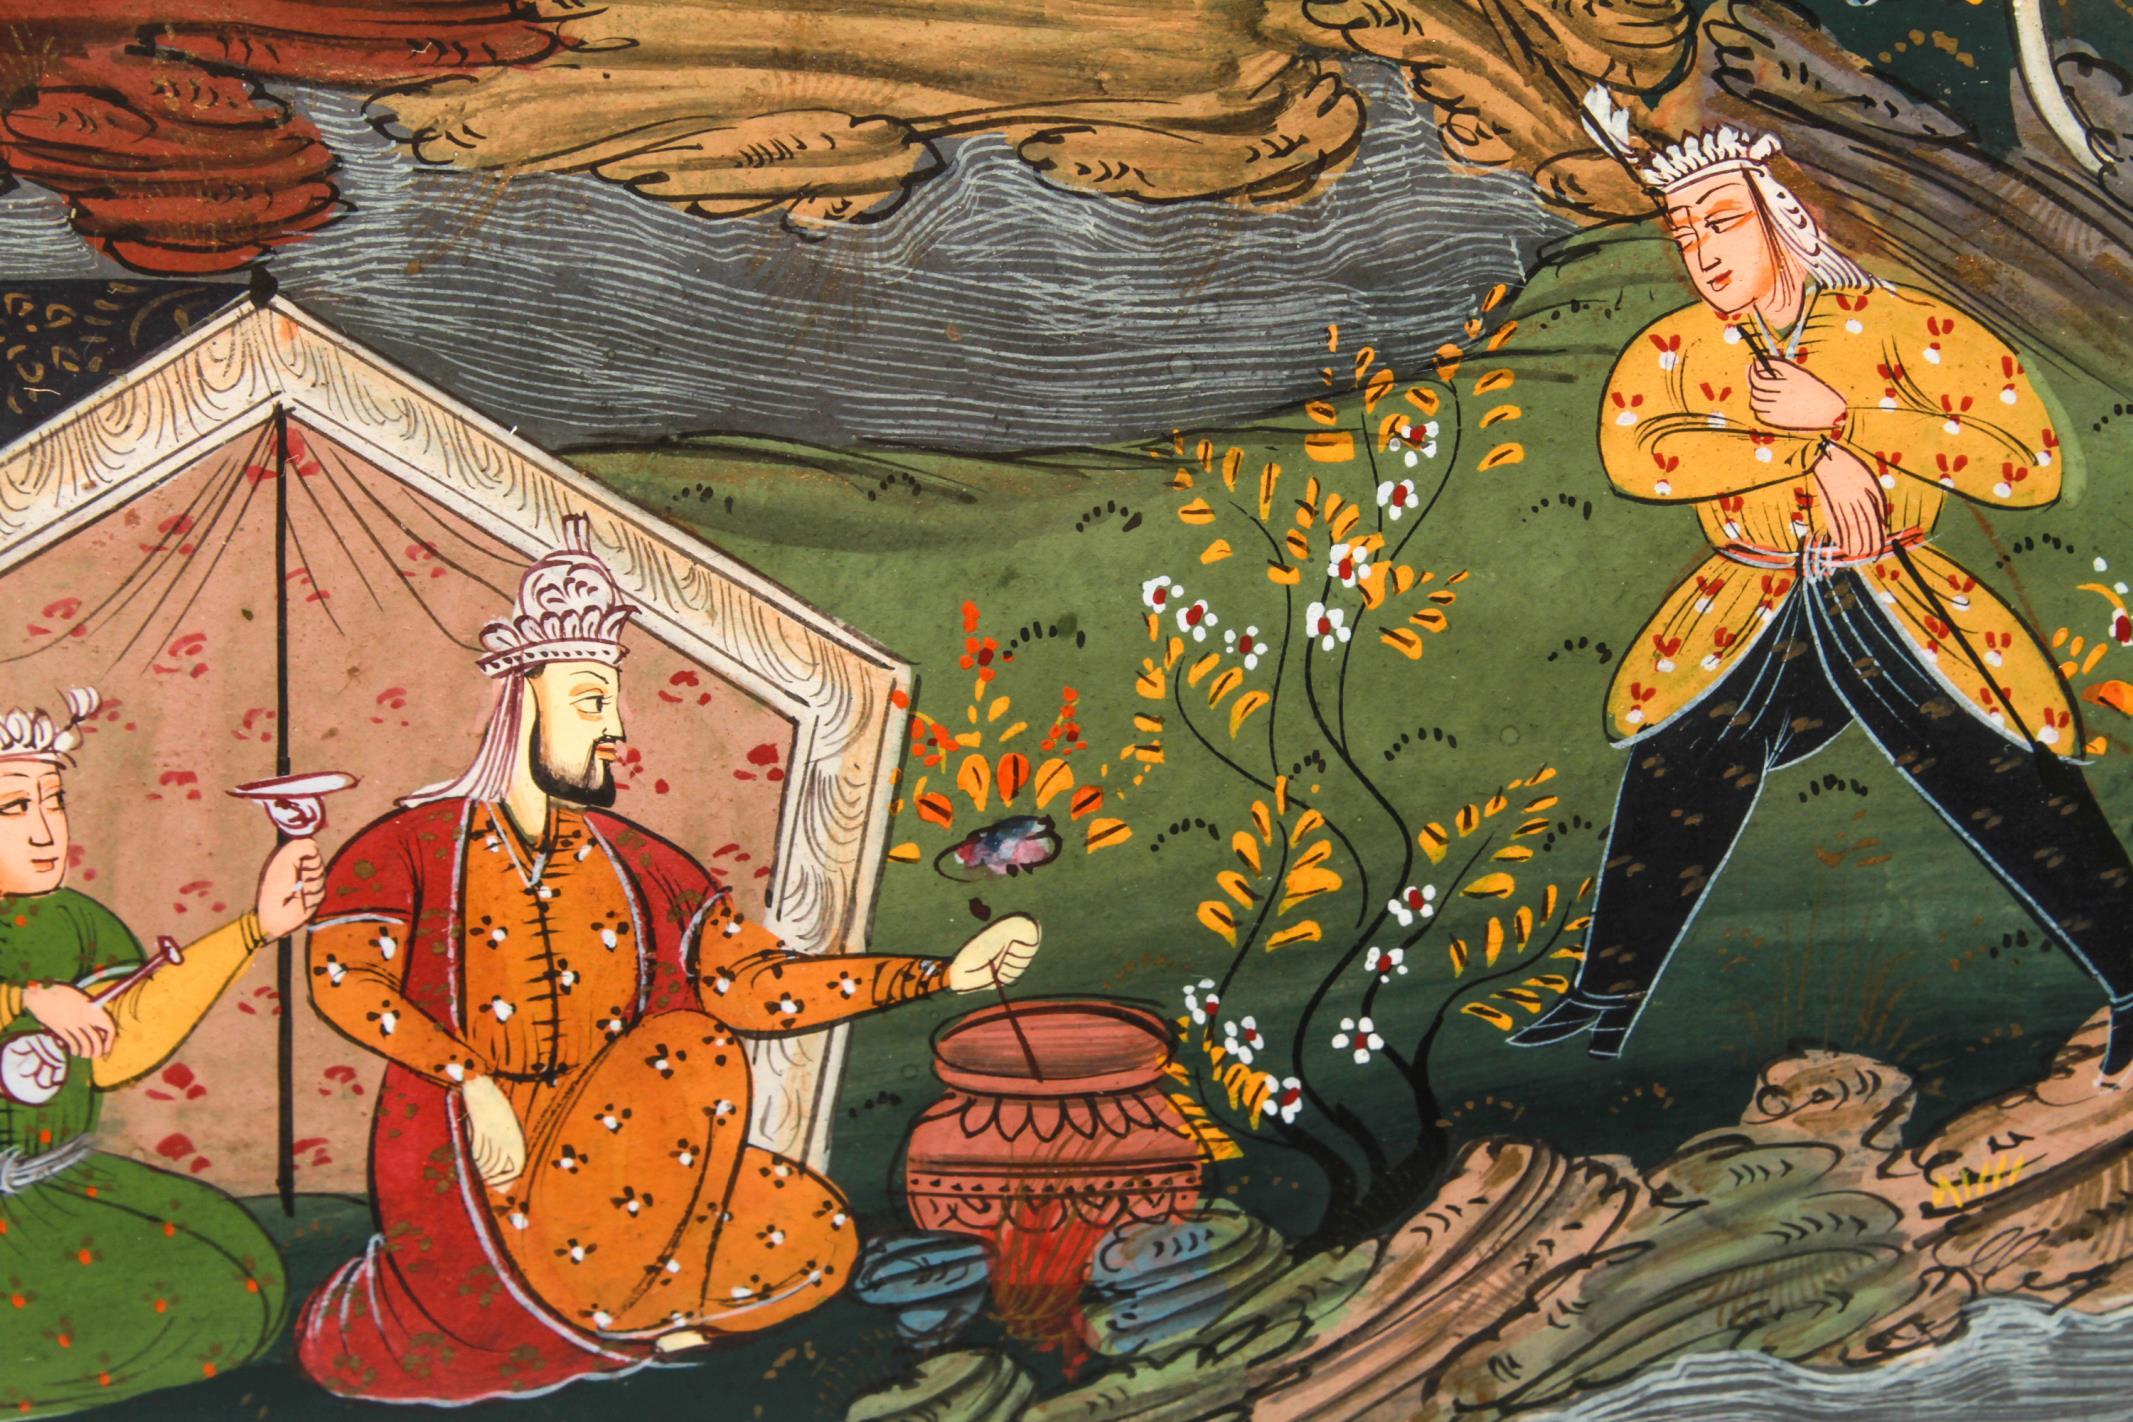 Illuminated framed Persian hand painted manuscript miniature depicting a scene from the epic poem of the Shahnameh, the Book of Kings, with a young man eavesdropping on two men sitting among trees.